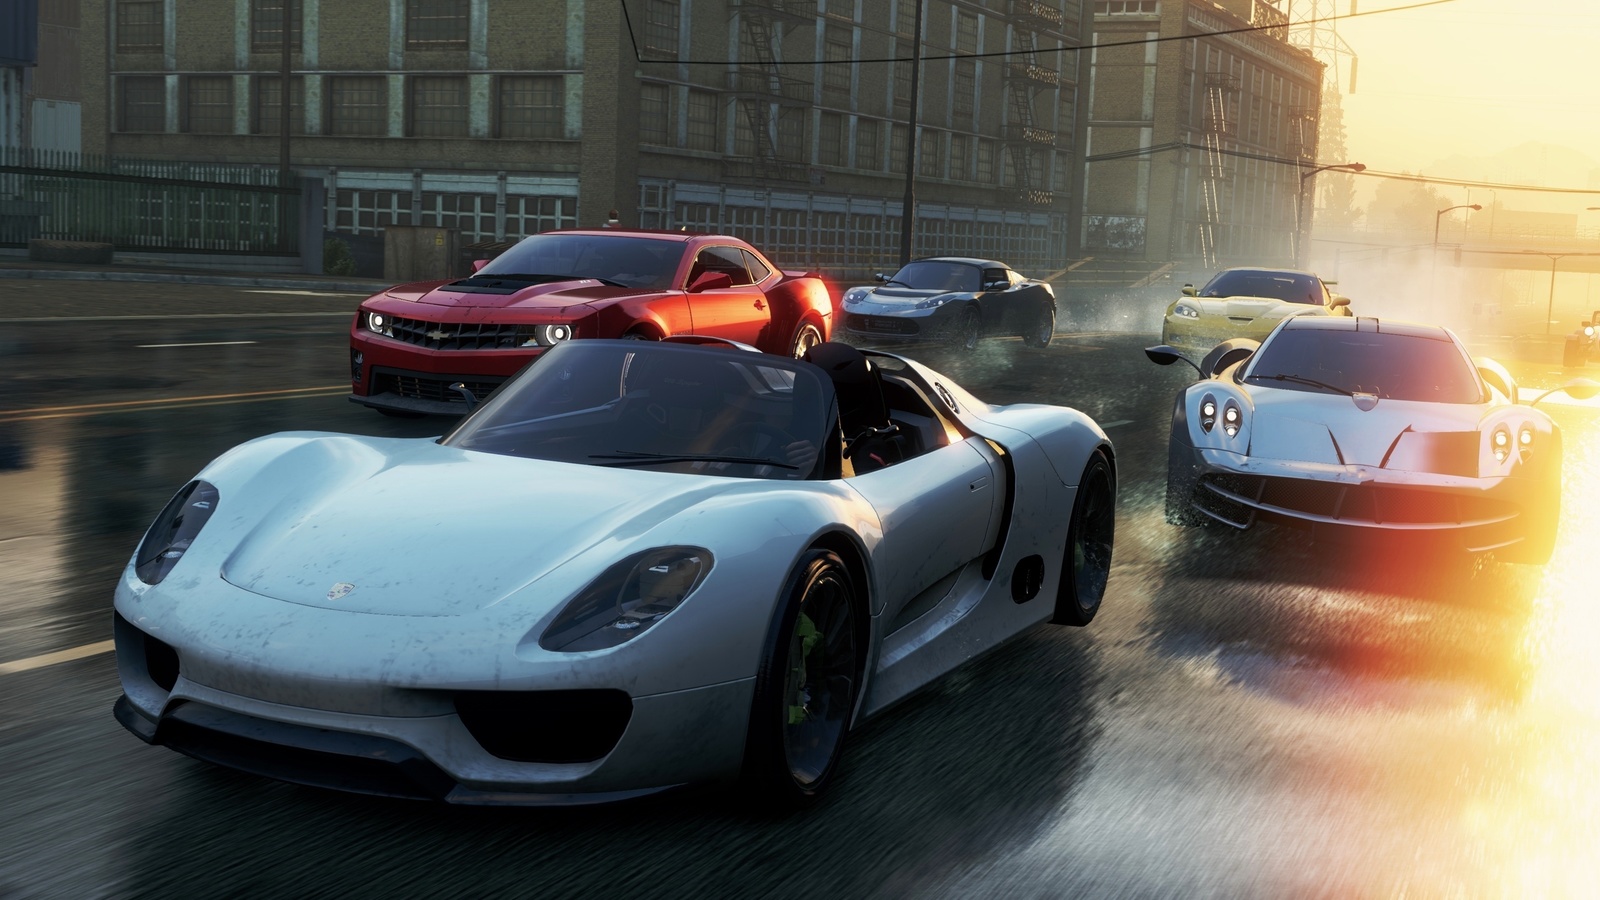 , , need for speed, most wanted, , , mclaren, lotus, porsche, chevrolet, , , , , , , porsche, porsche 918 spyder, spyder, 918 spyder, pagani